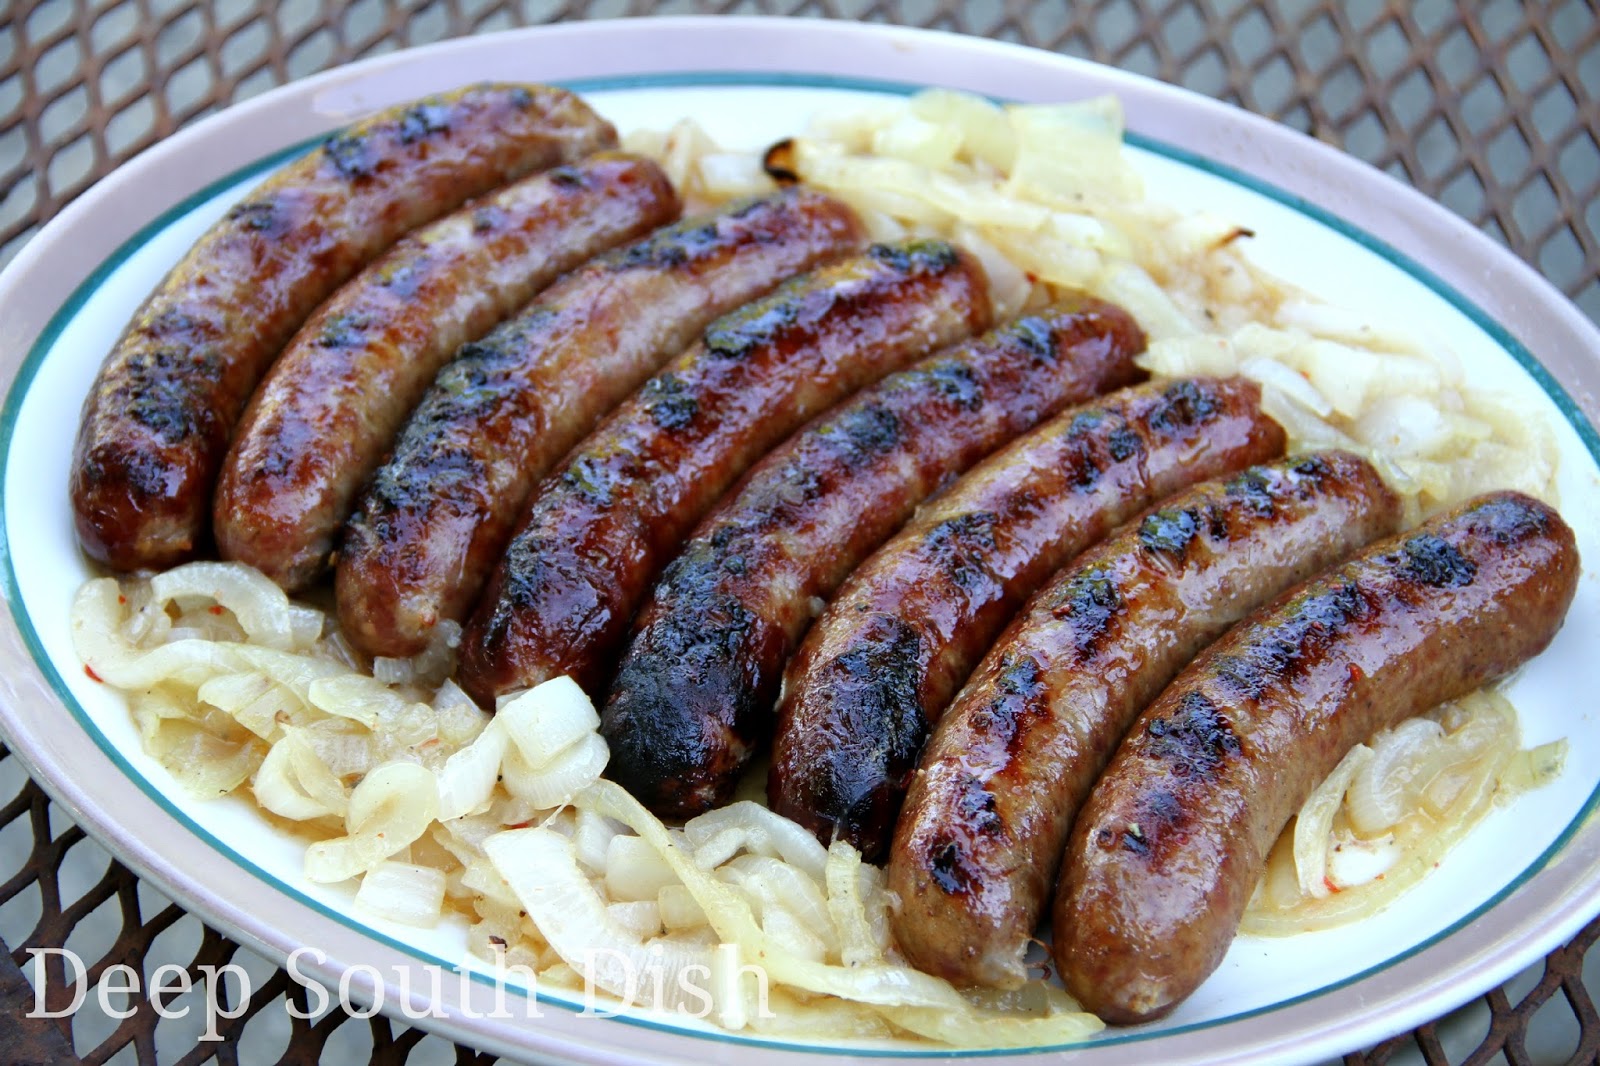 family dinner just got better with these 15 bratwurst recipes